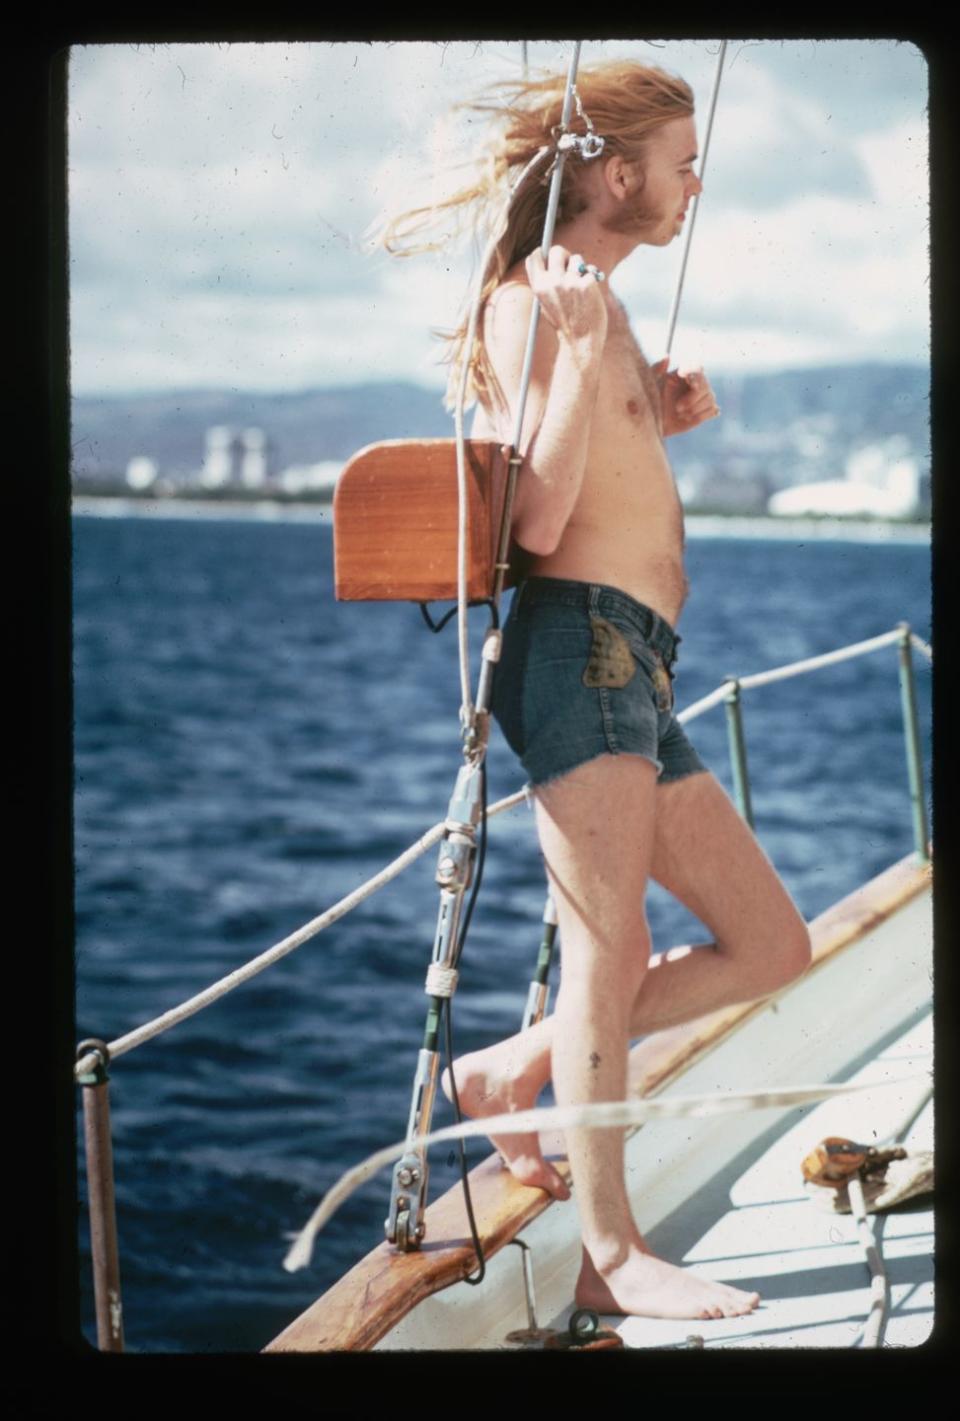 The 1970s Were a Great Time To Be Famous and Lounging on a Boat